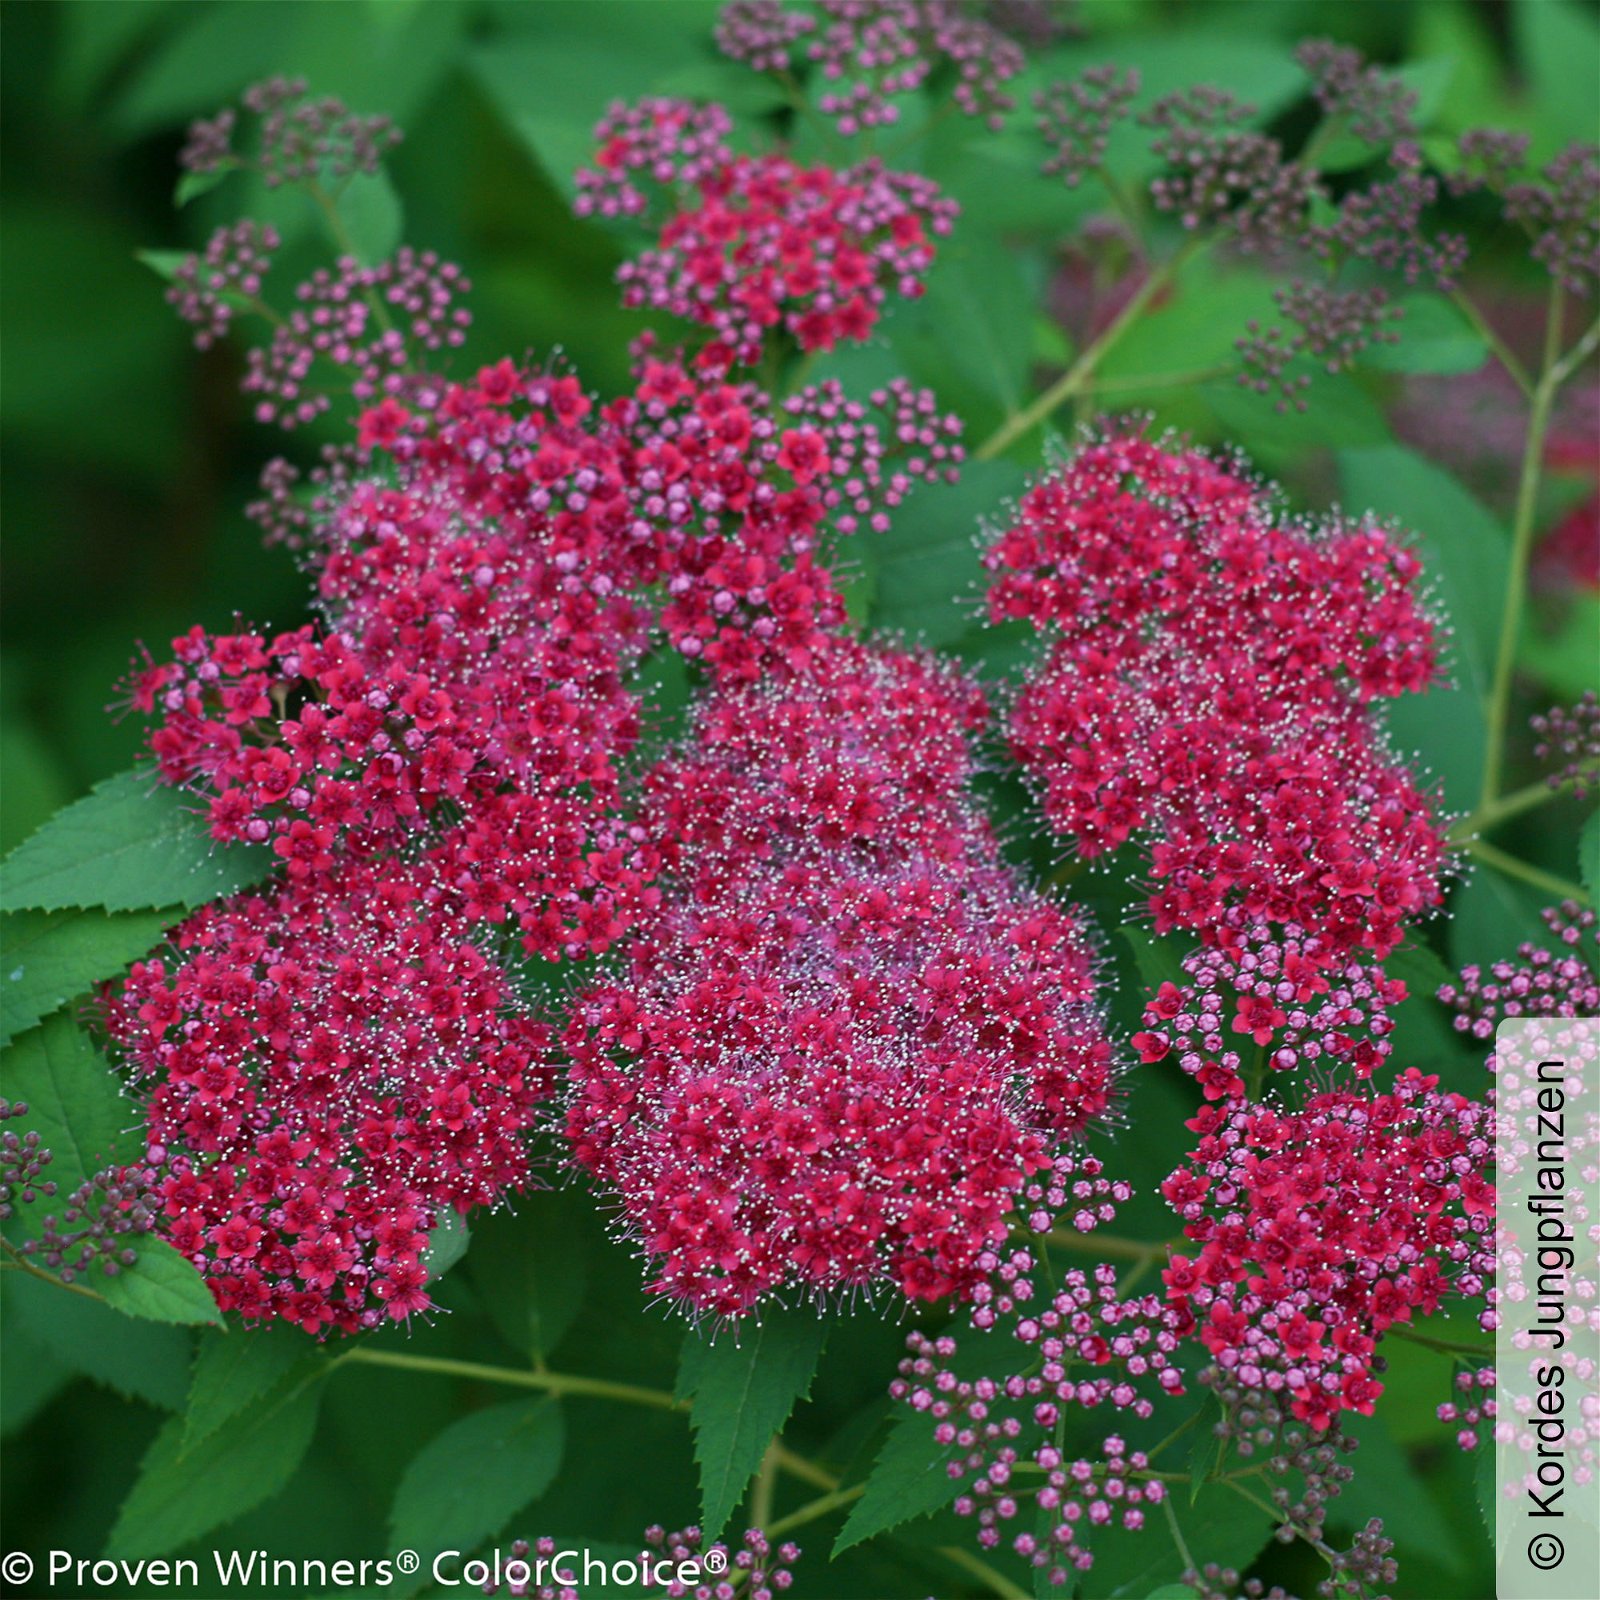 Rote Japanspiere 'Double Play® Red', Spiraea japonica, rot, im Topf 5 Liter